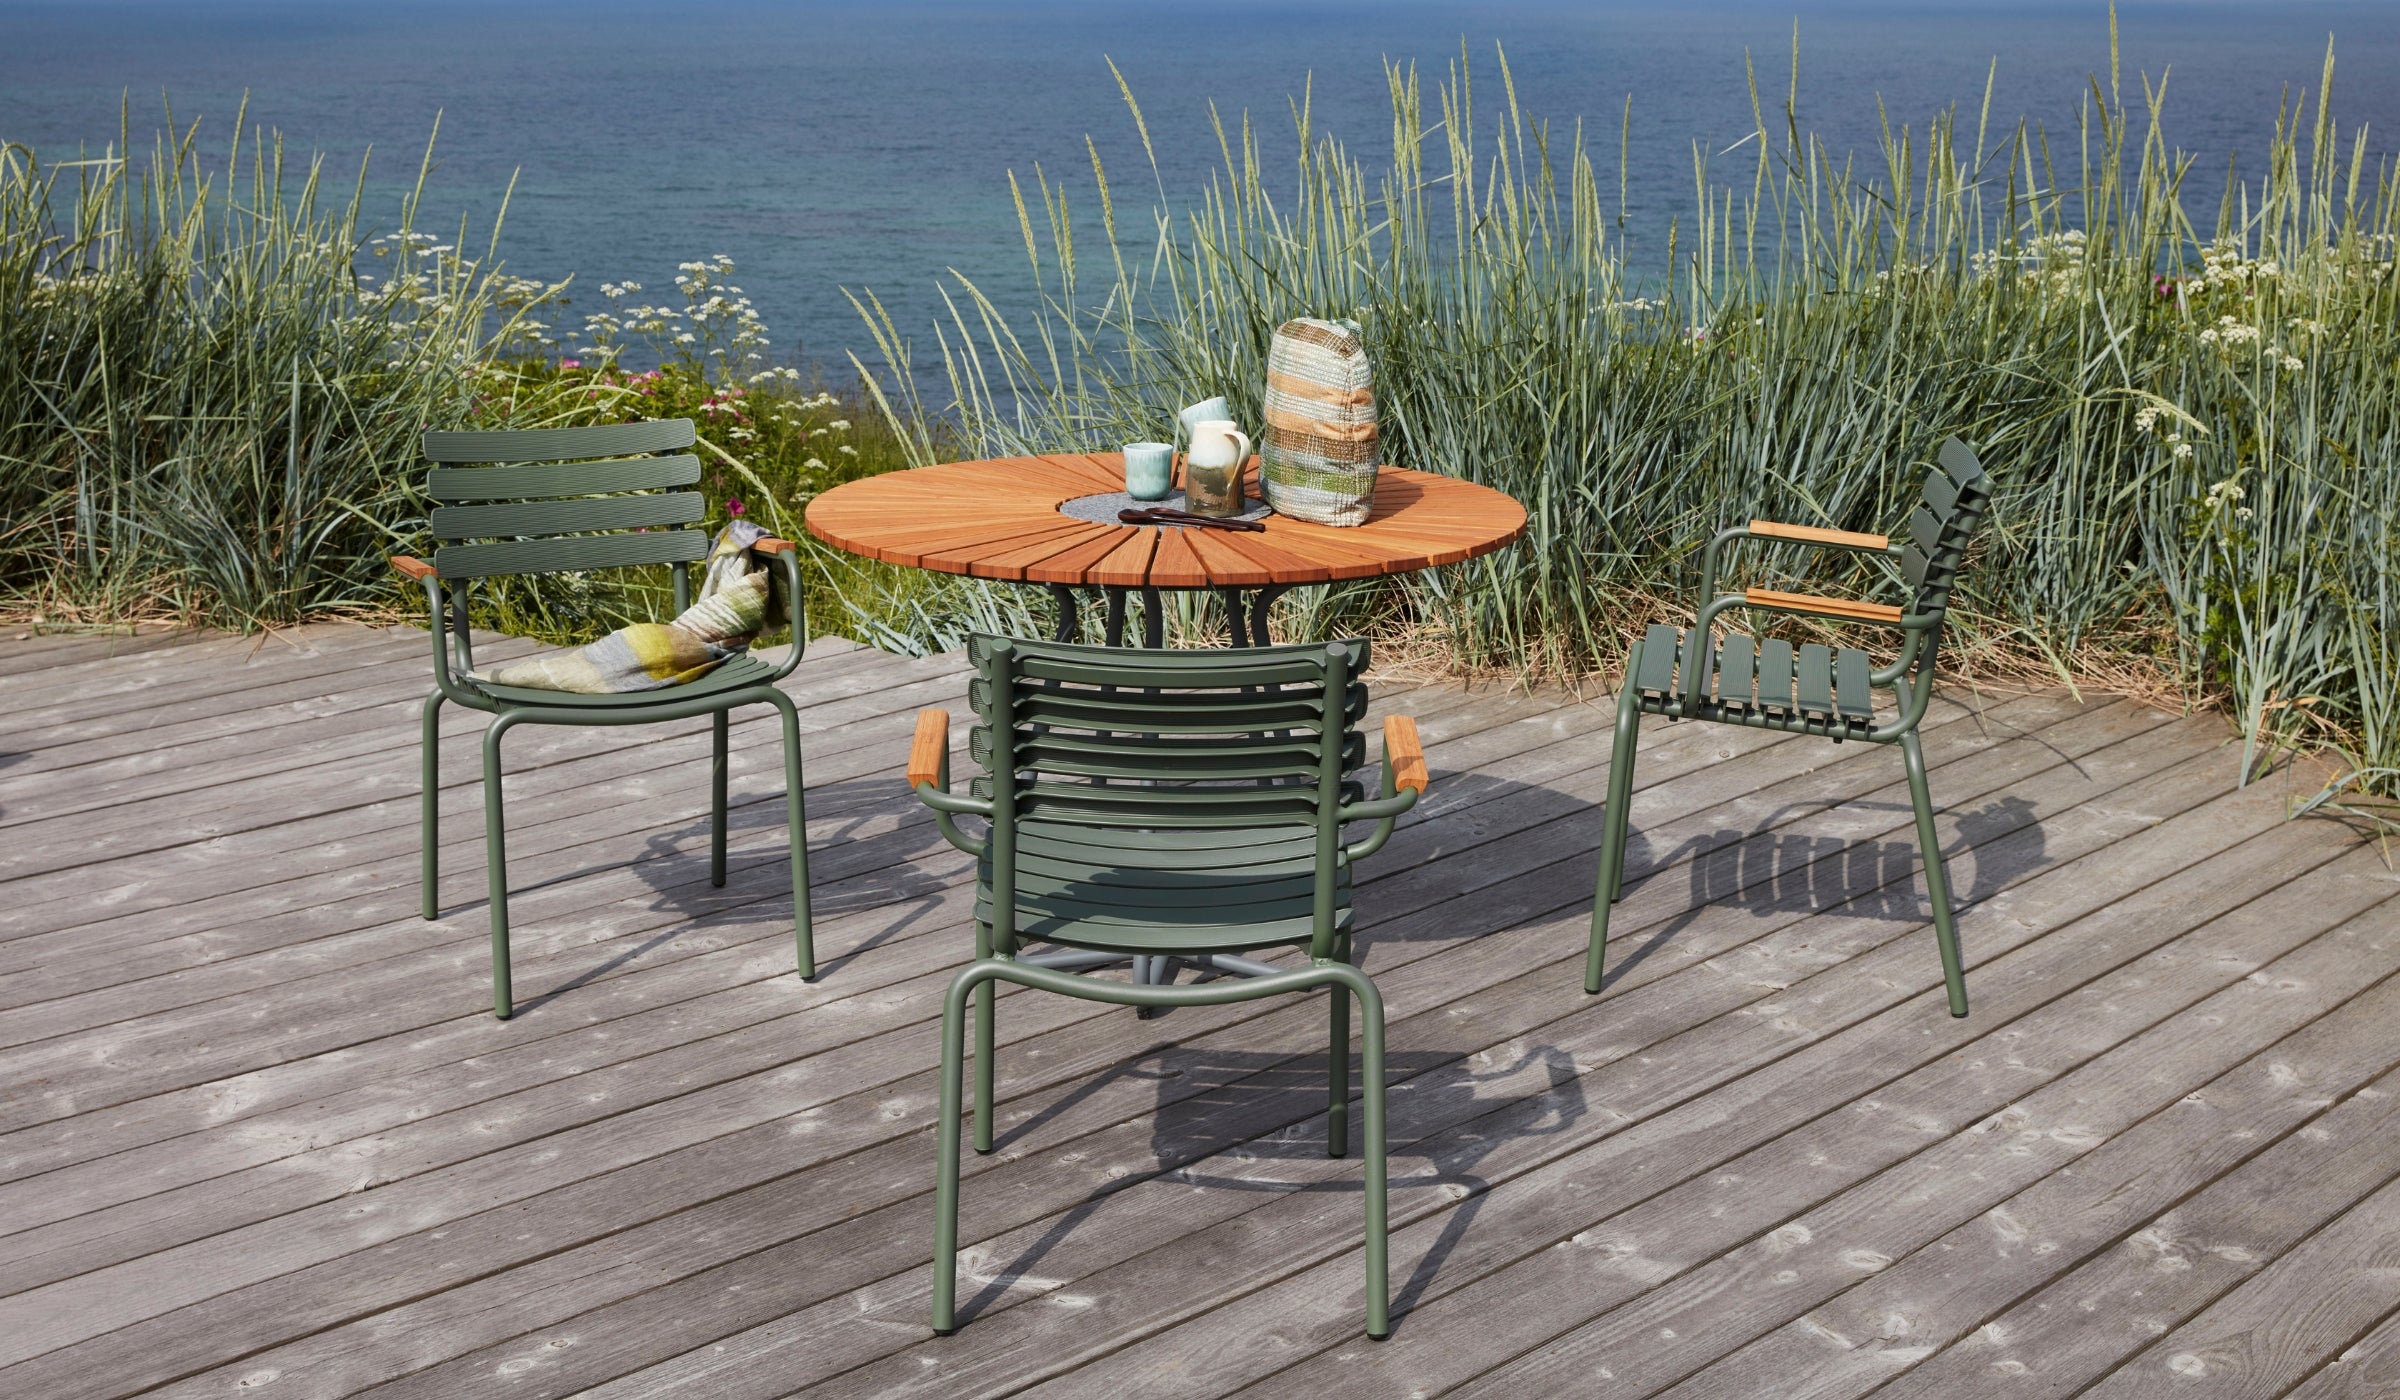 Reclips - Outdoor chair in aluminum and recycled plastic with bamboo armrests, olive green